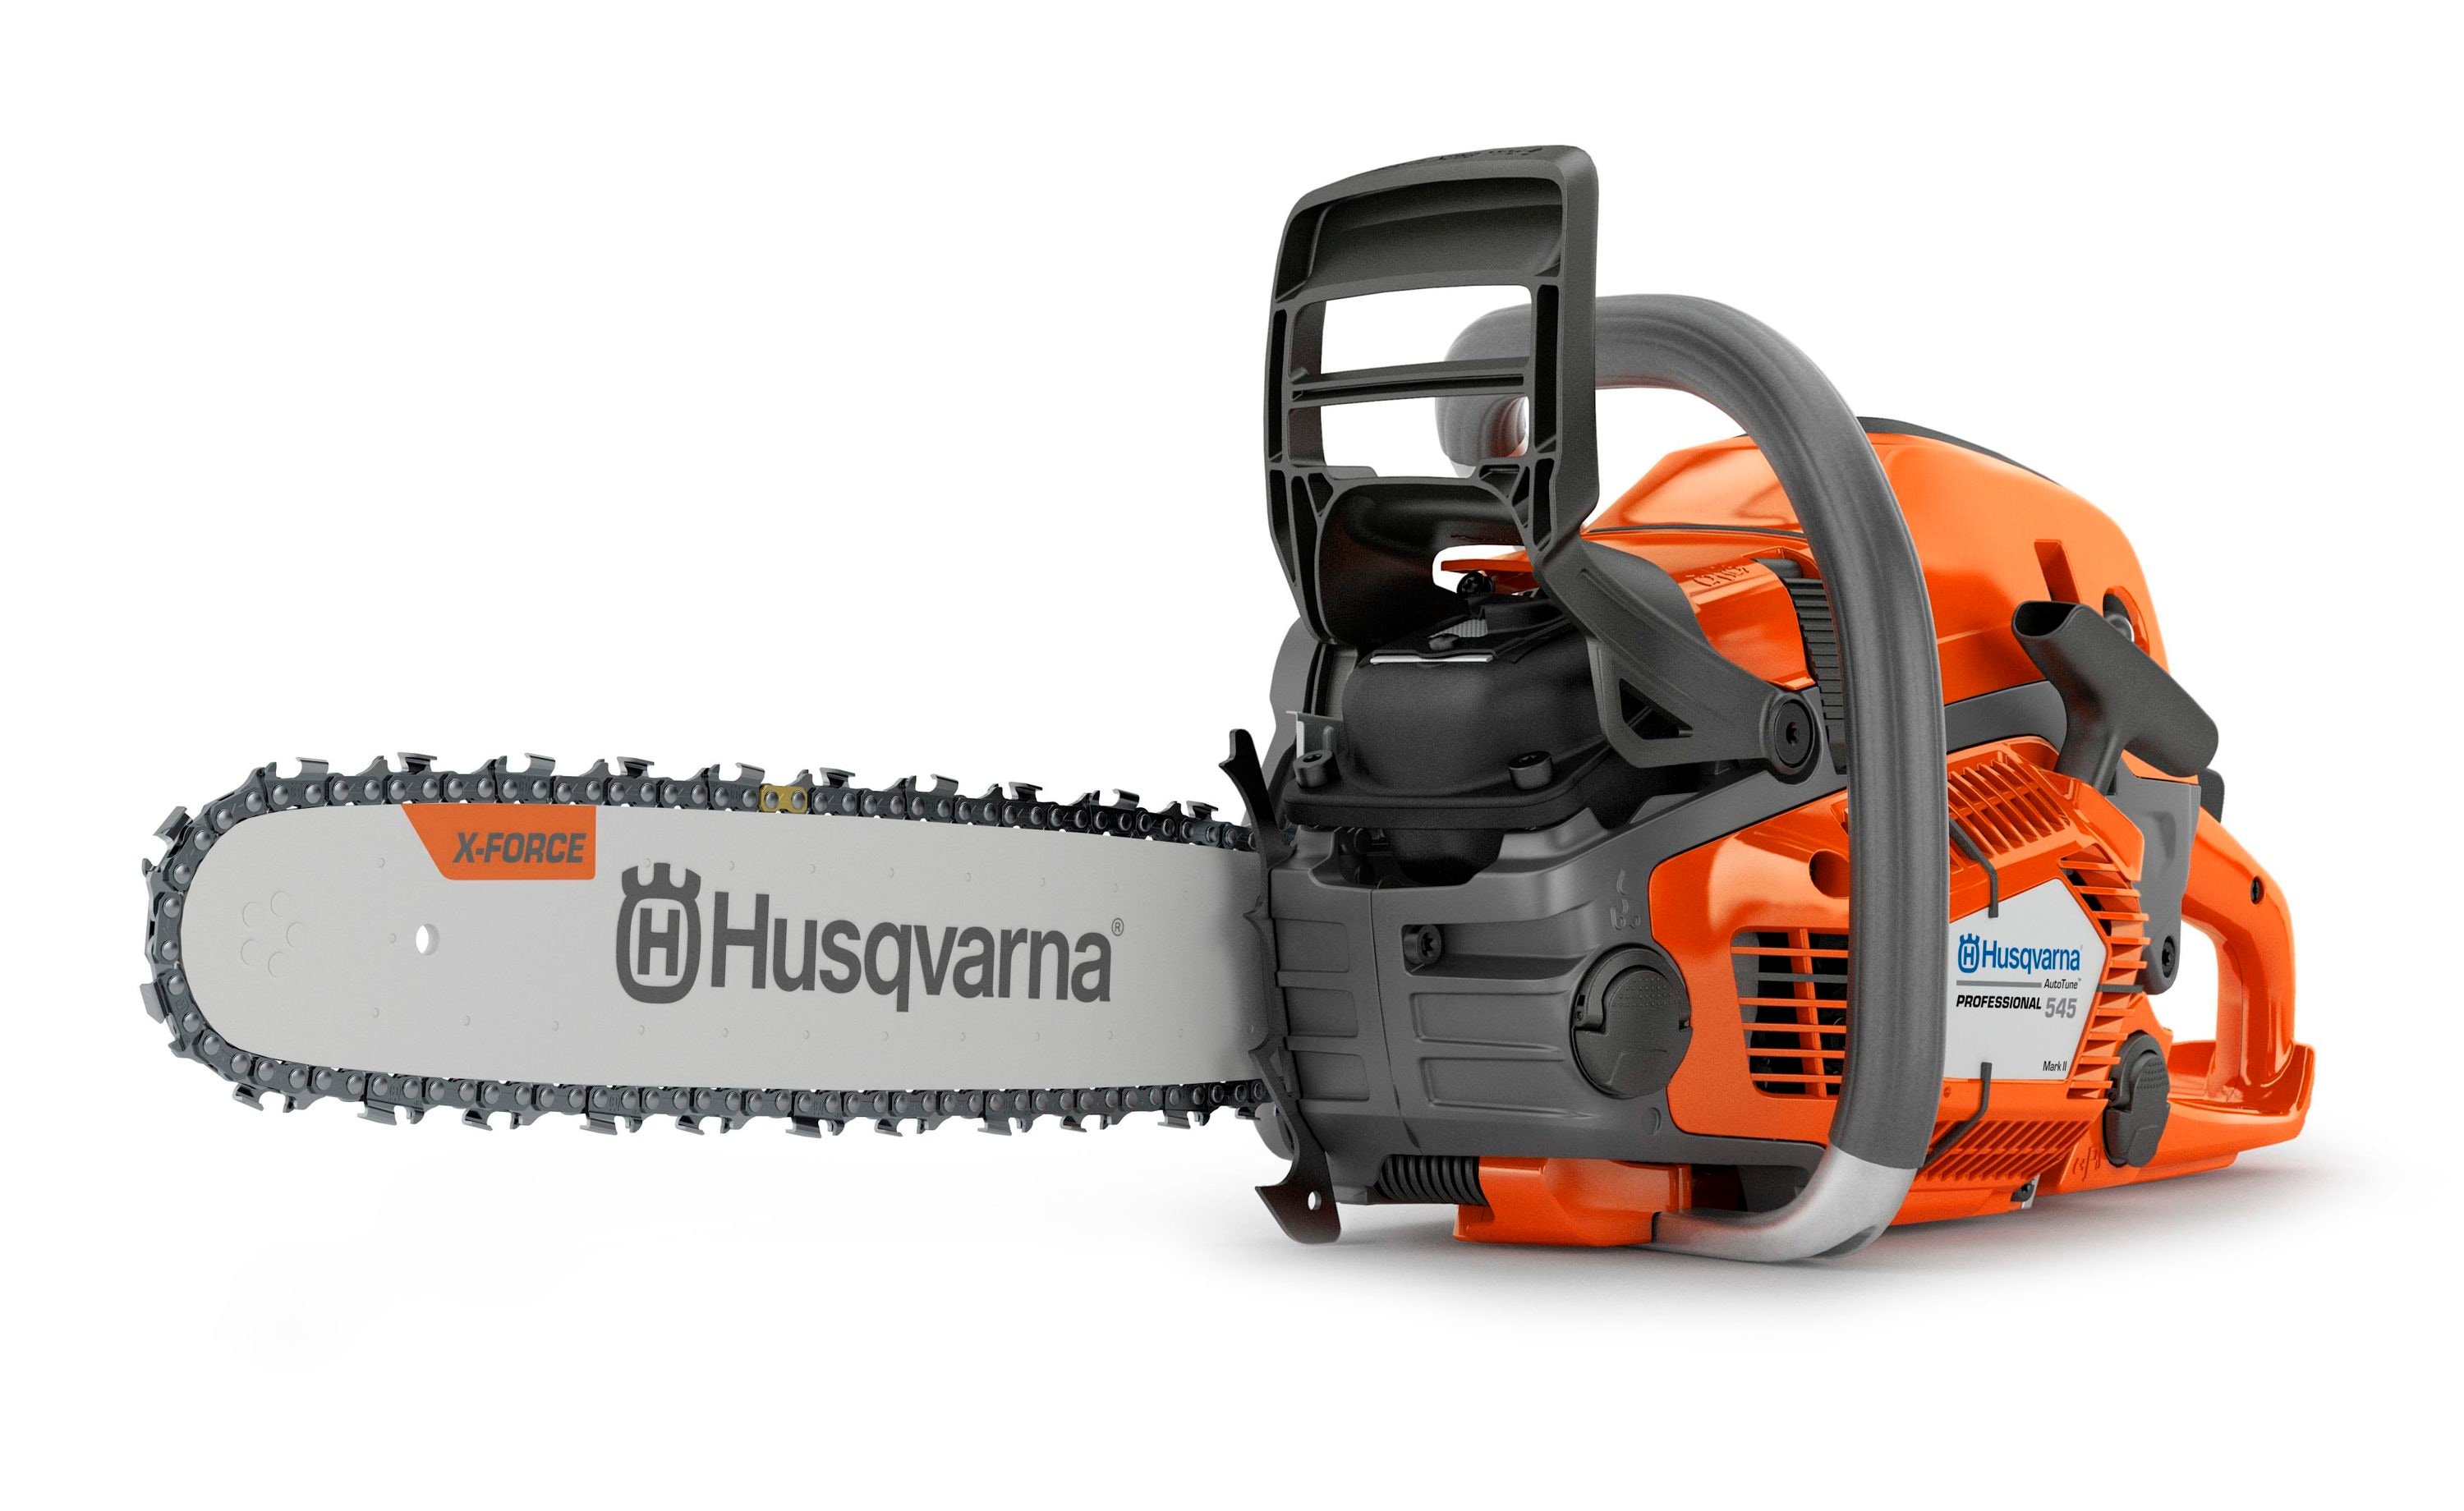 Husqvarna 545 Mark II 20-in Gas Chainsaw in the Chainsaws 